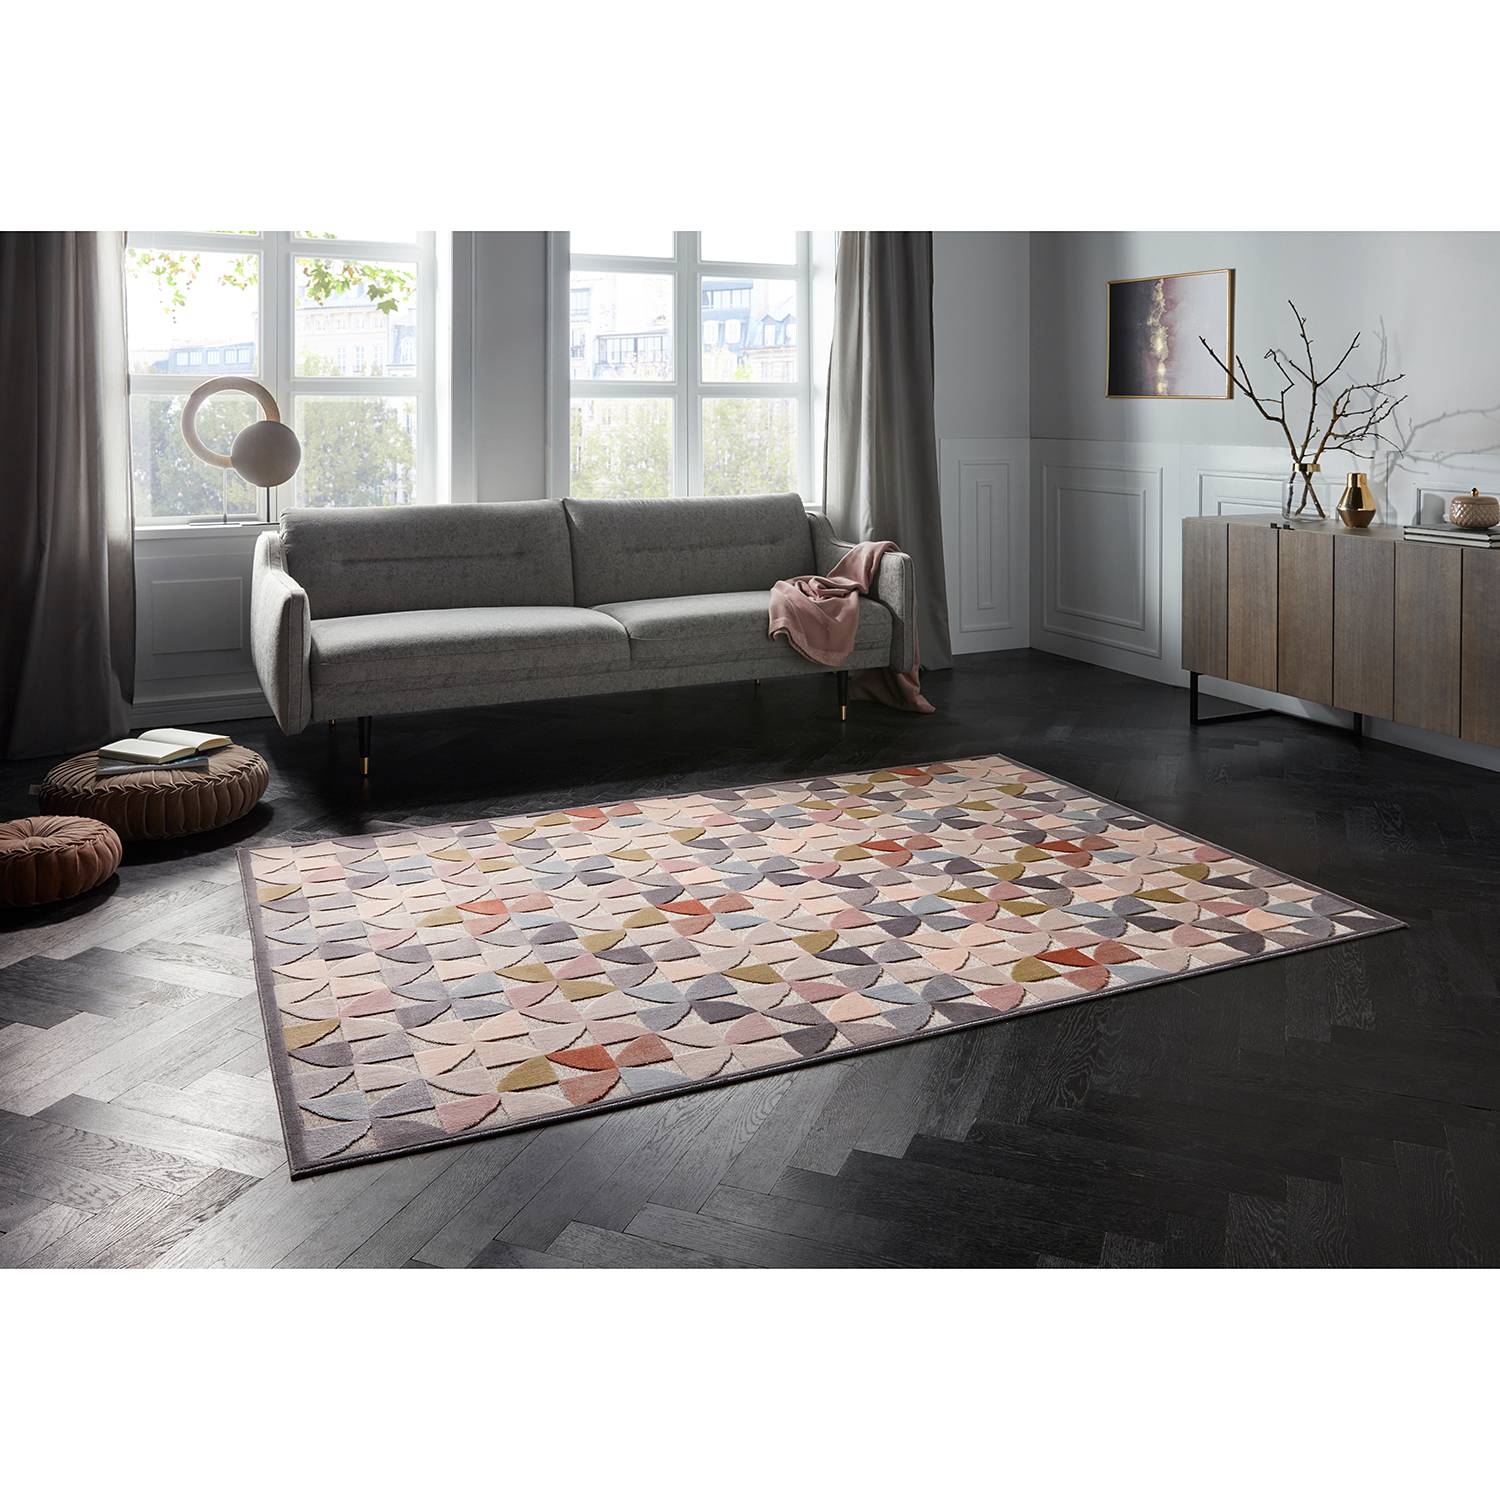 Image of Tapis Ailette 000000001000193679